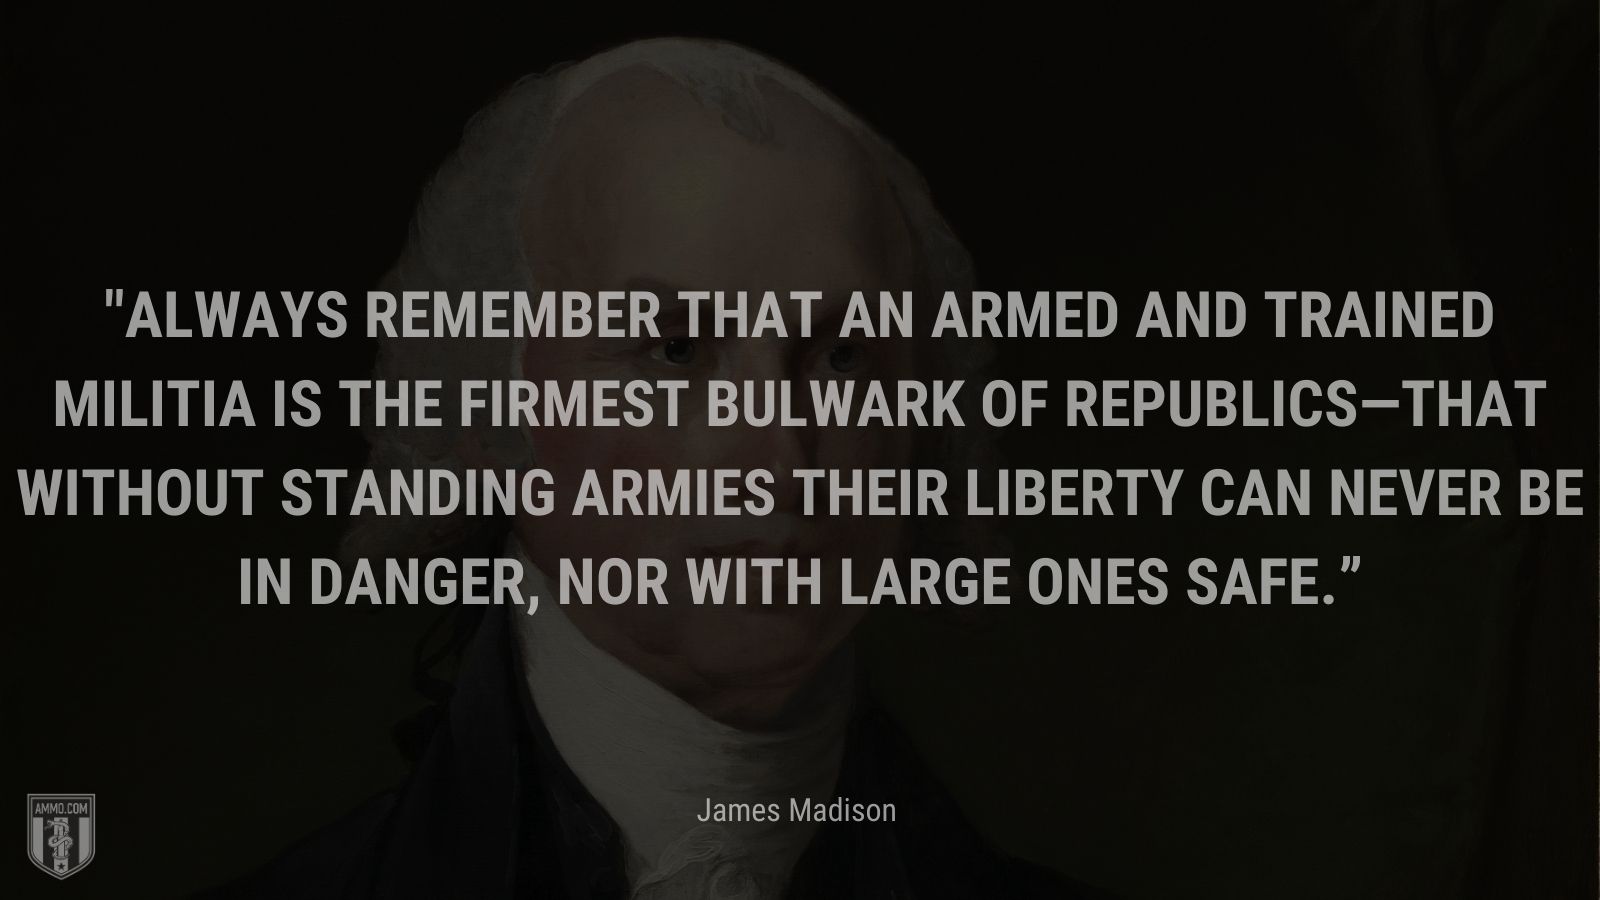 “Always remember that an armed and trained militia is the firmest bulwark of republics—that without standing armies their liberty can never be in danger, nor with large ones safe.” - James Madison